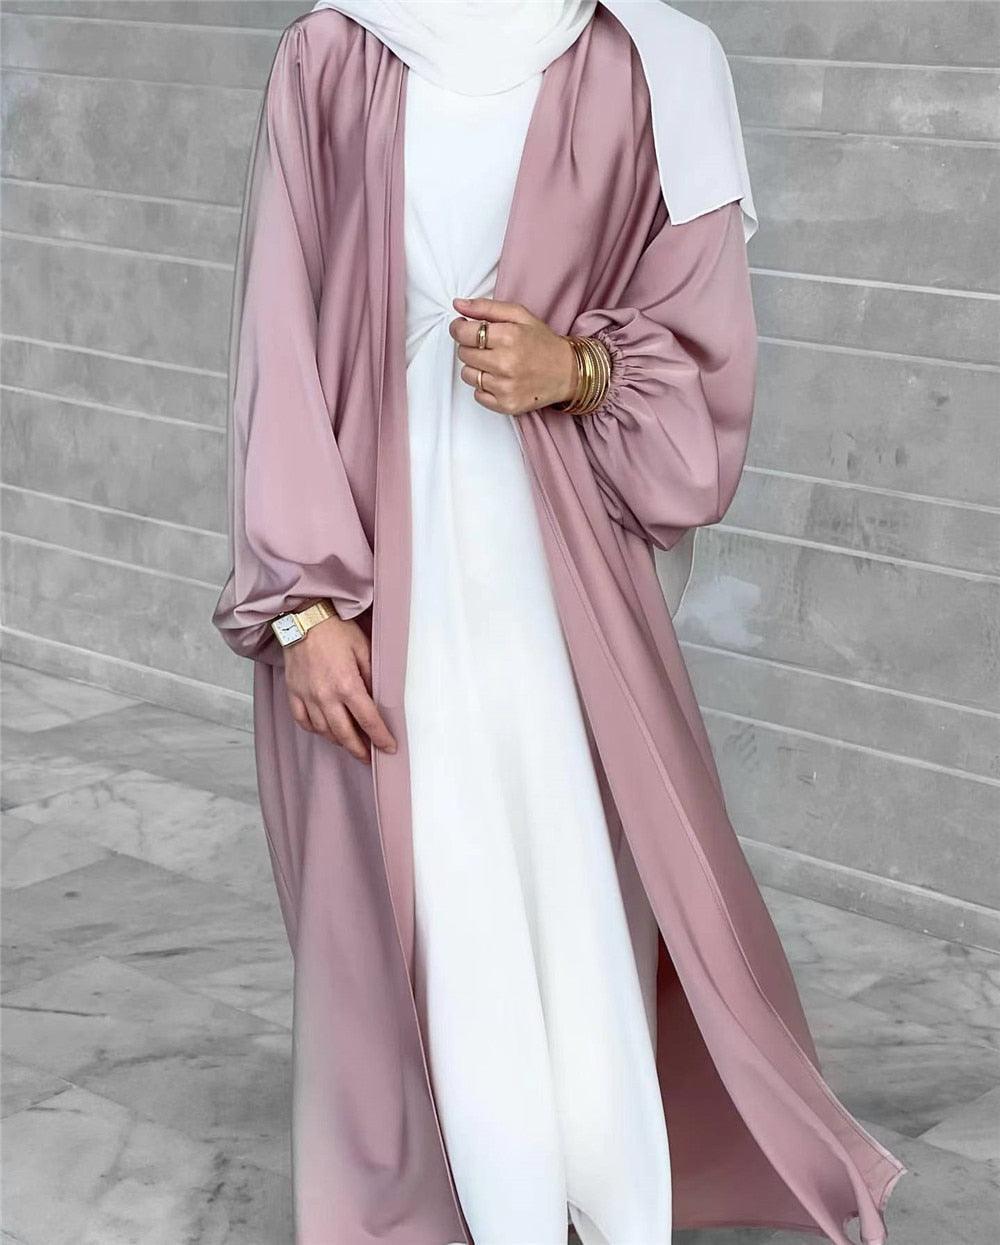 On sale - Modest Open Abaya - 6 Colours - Free shipping -